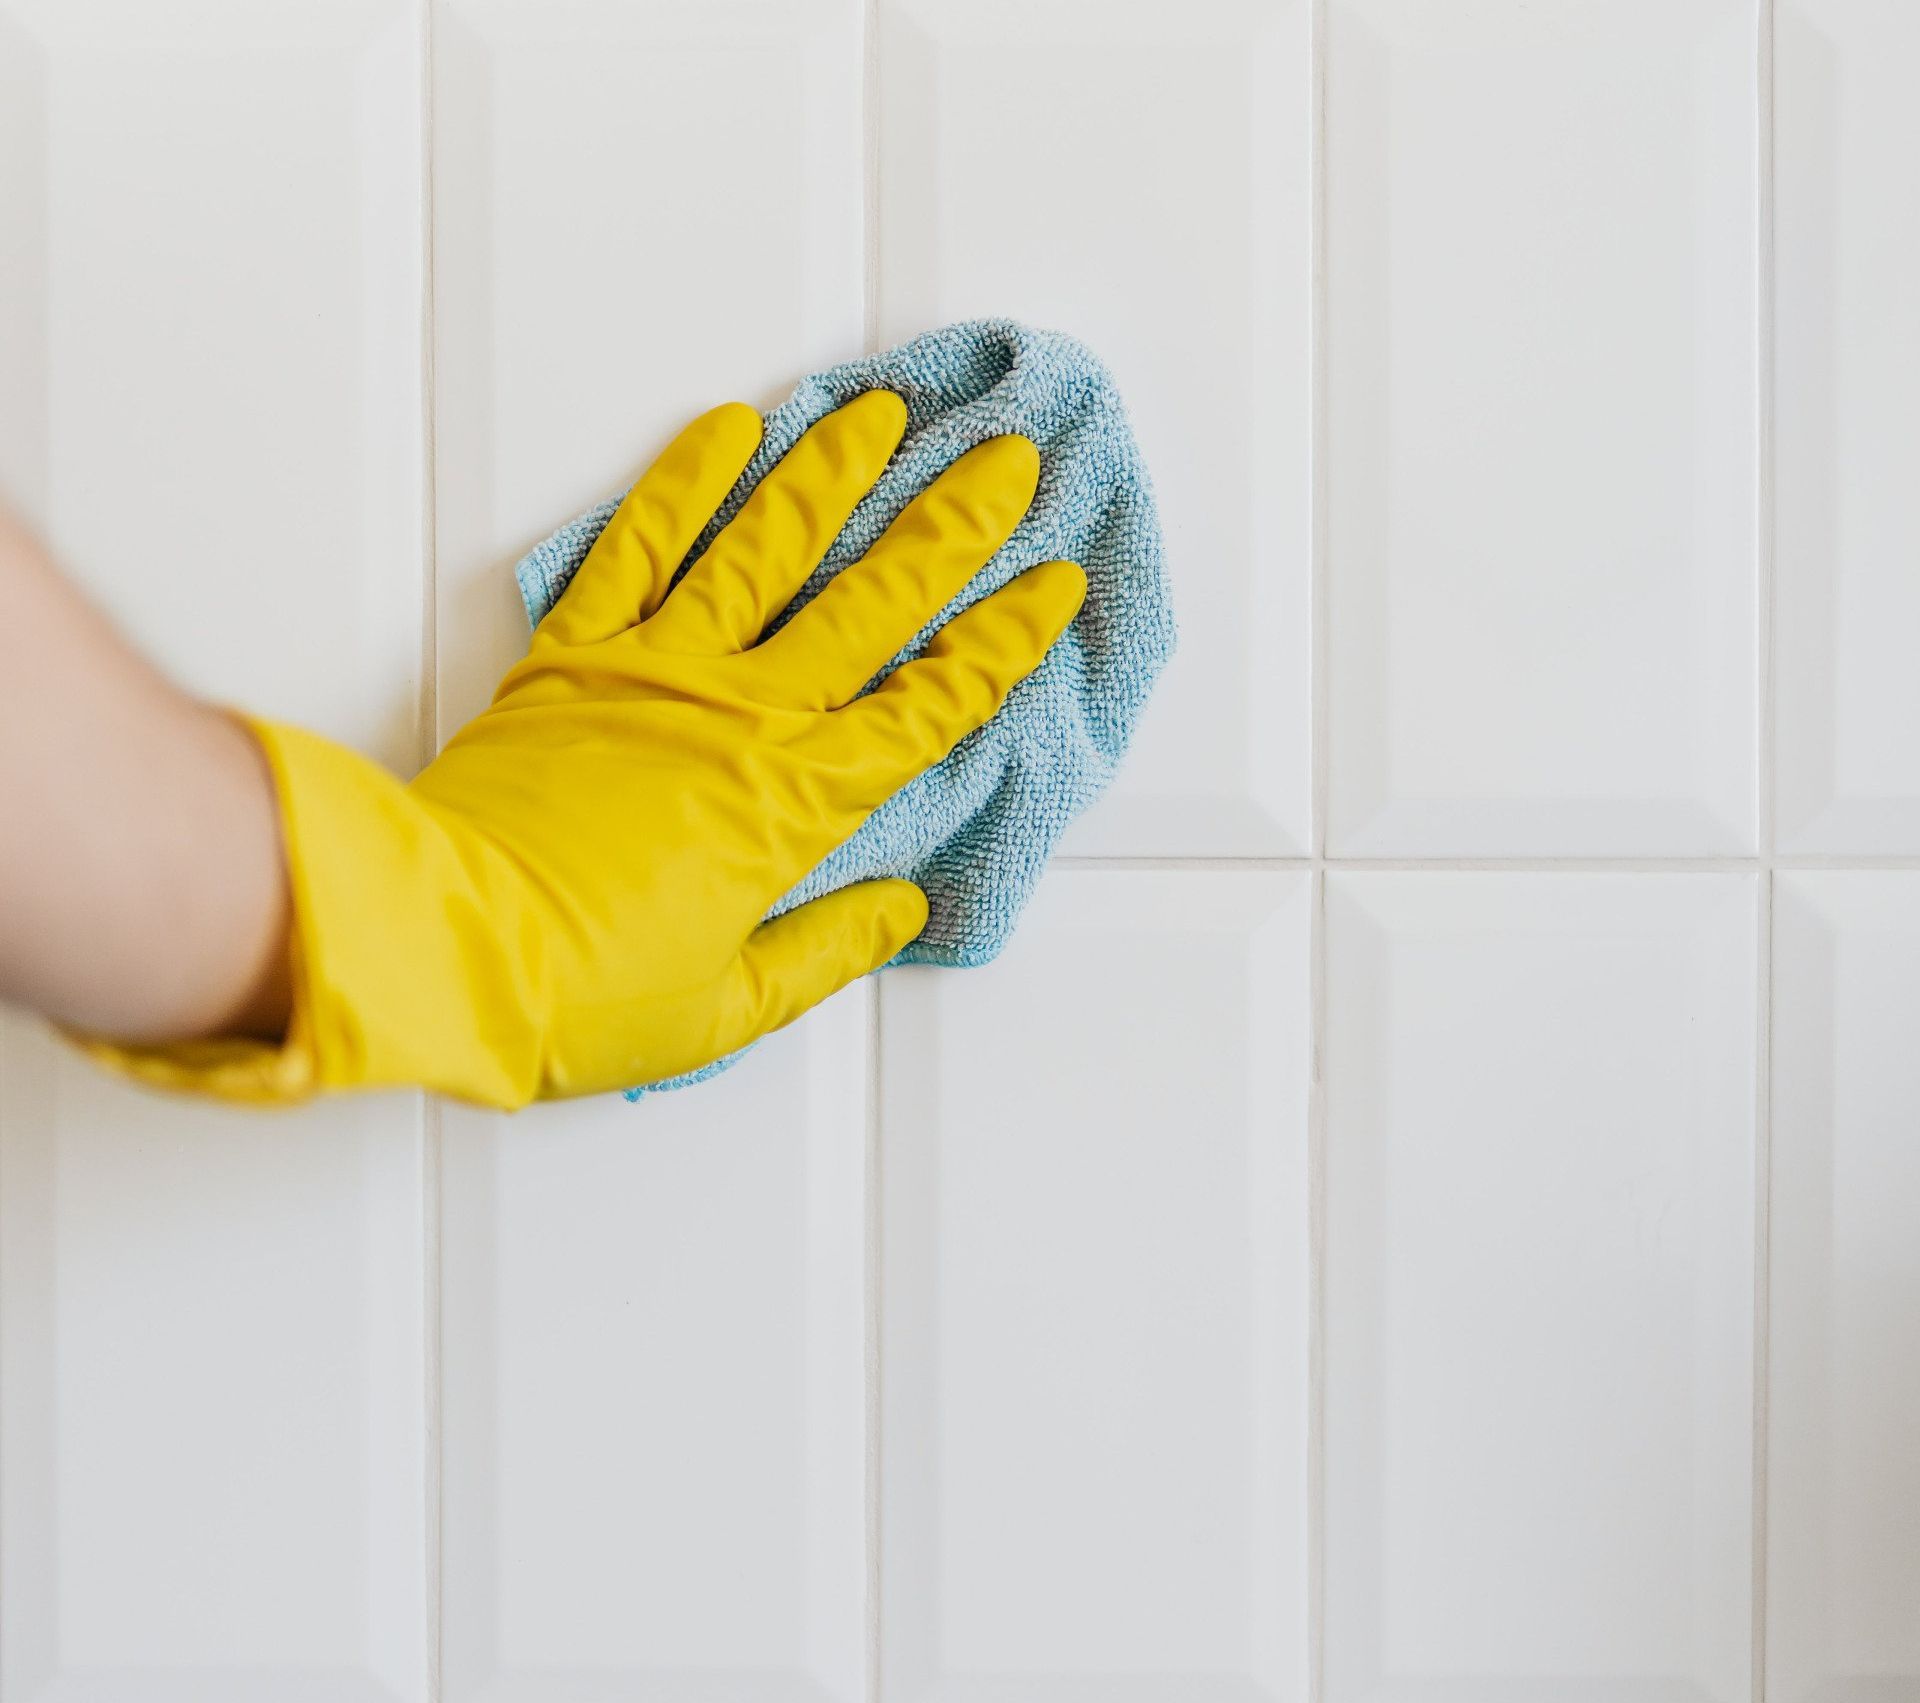 Cleaner wiping a cloth along grout lines between tiles to remove dirt and stains, revealing a cleaner and brighter surface.